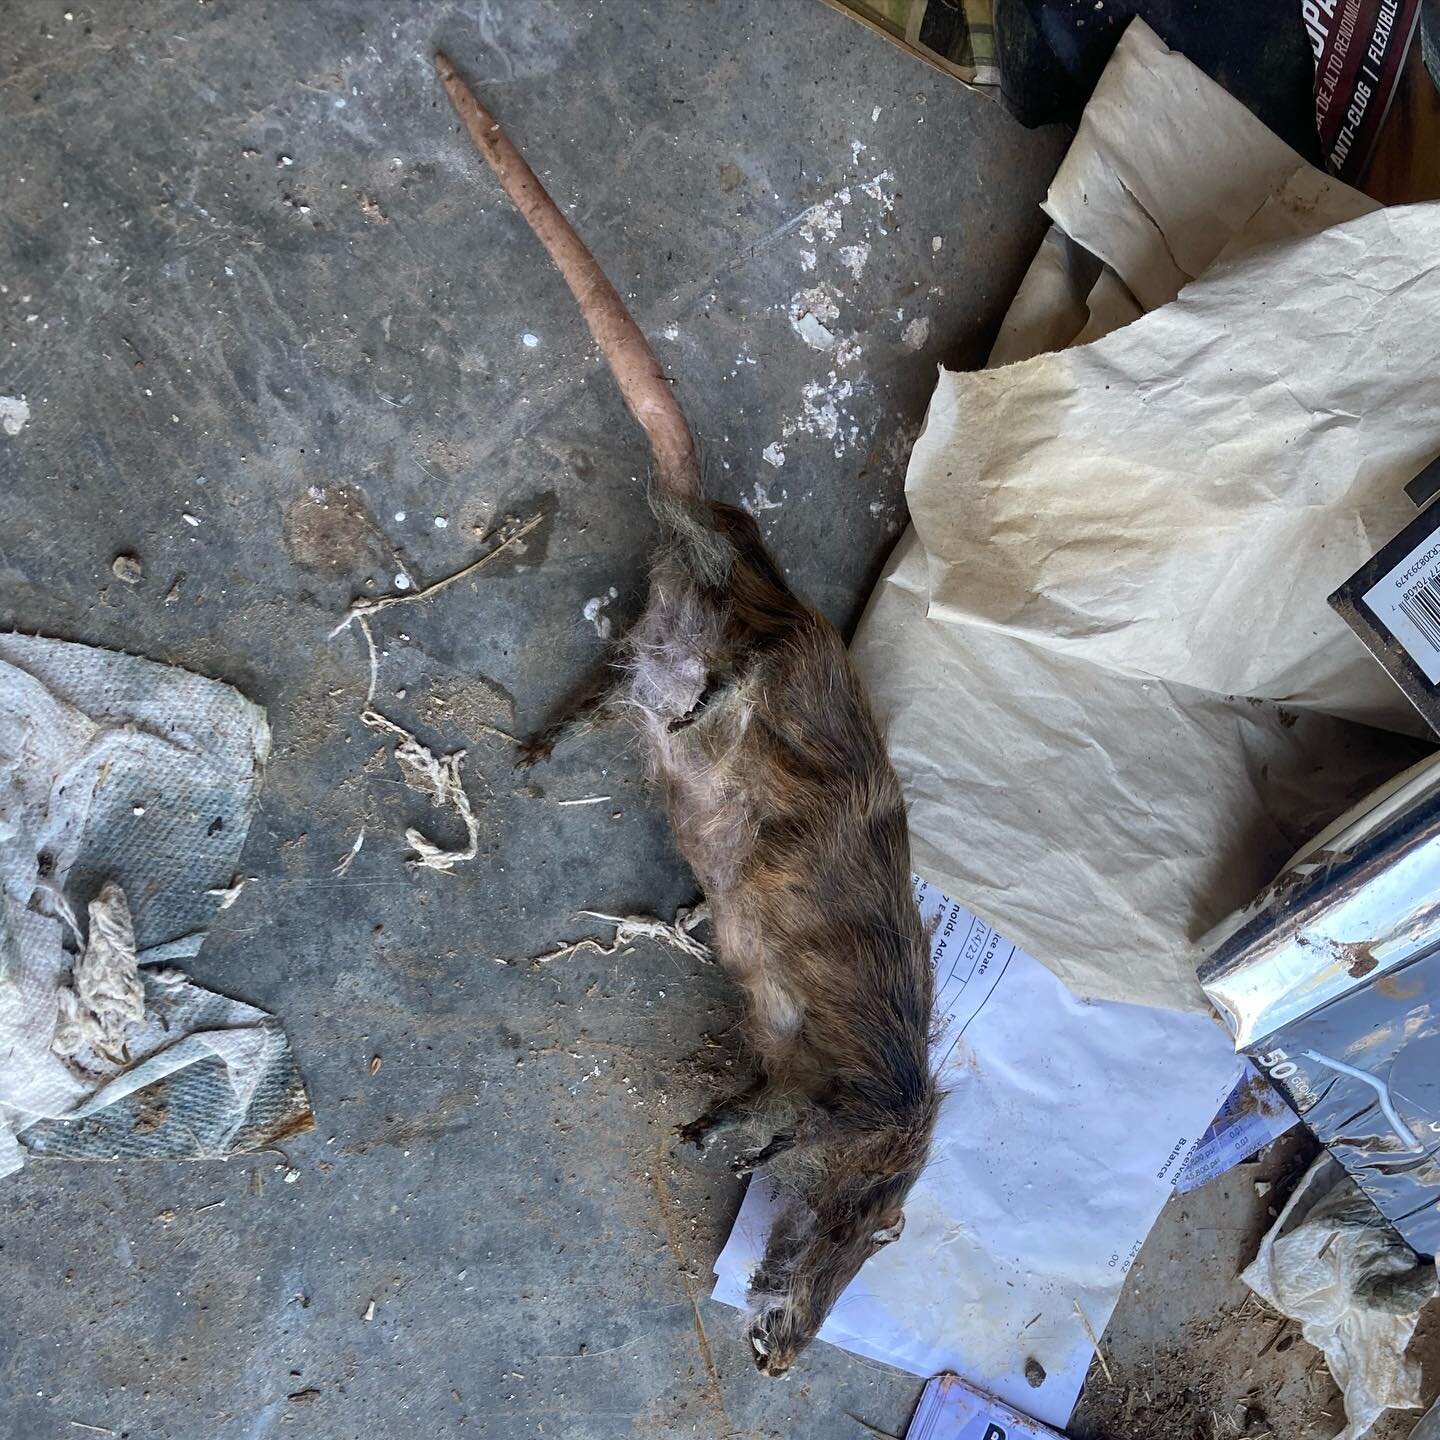 NOT a dead rat, just more creature effects fun&hellip; #vermin #rodent #rat #taxidermy #creatureeffects #moviemagic #wildlifeartist #nmfilm #propmaker #props